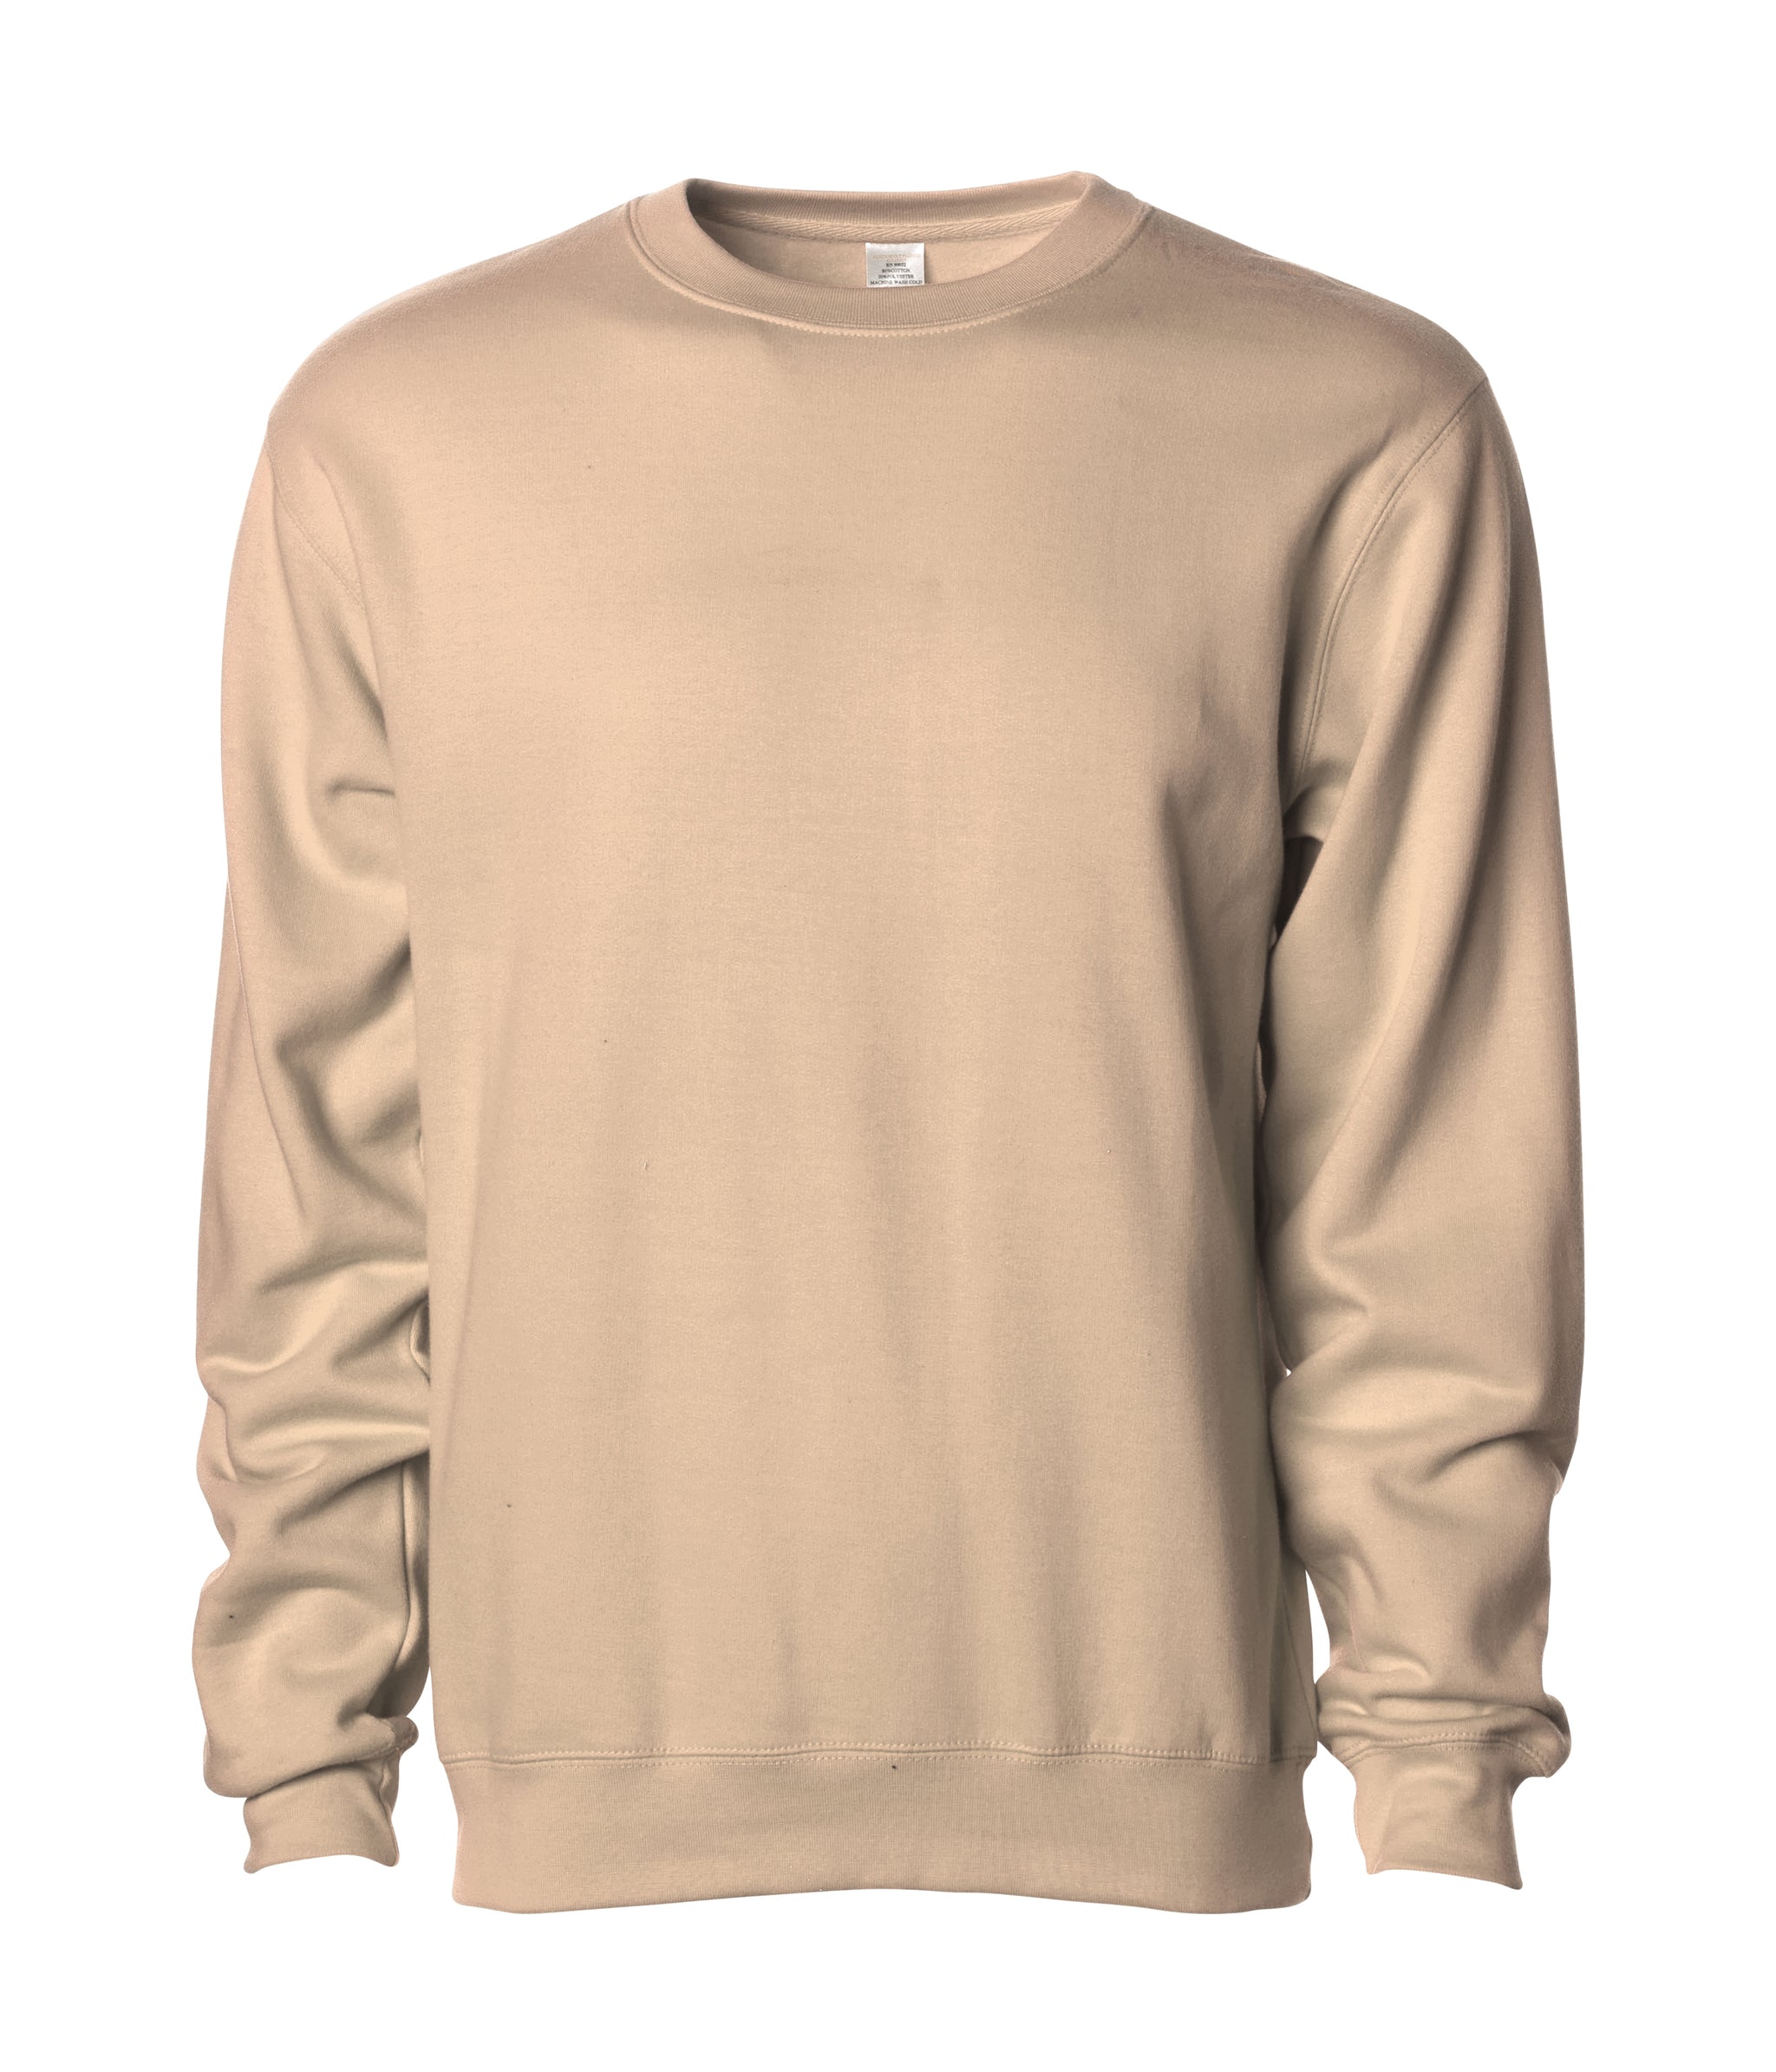 Men's Midweight Crew Sweatshirt | Basic Color Collection 